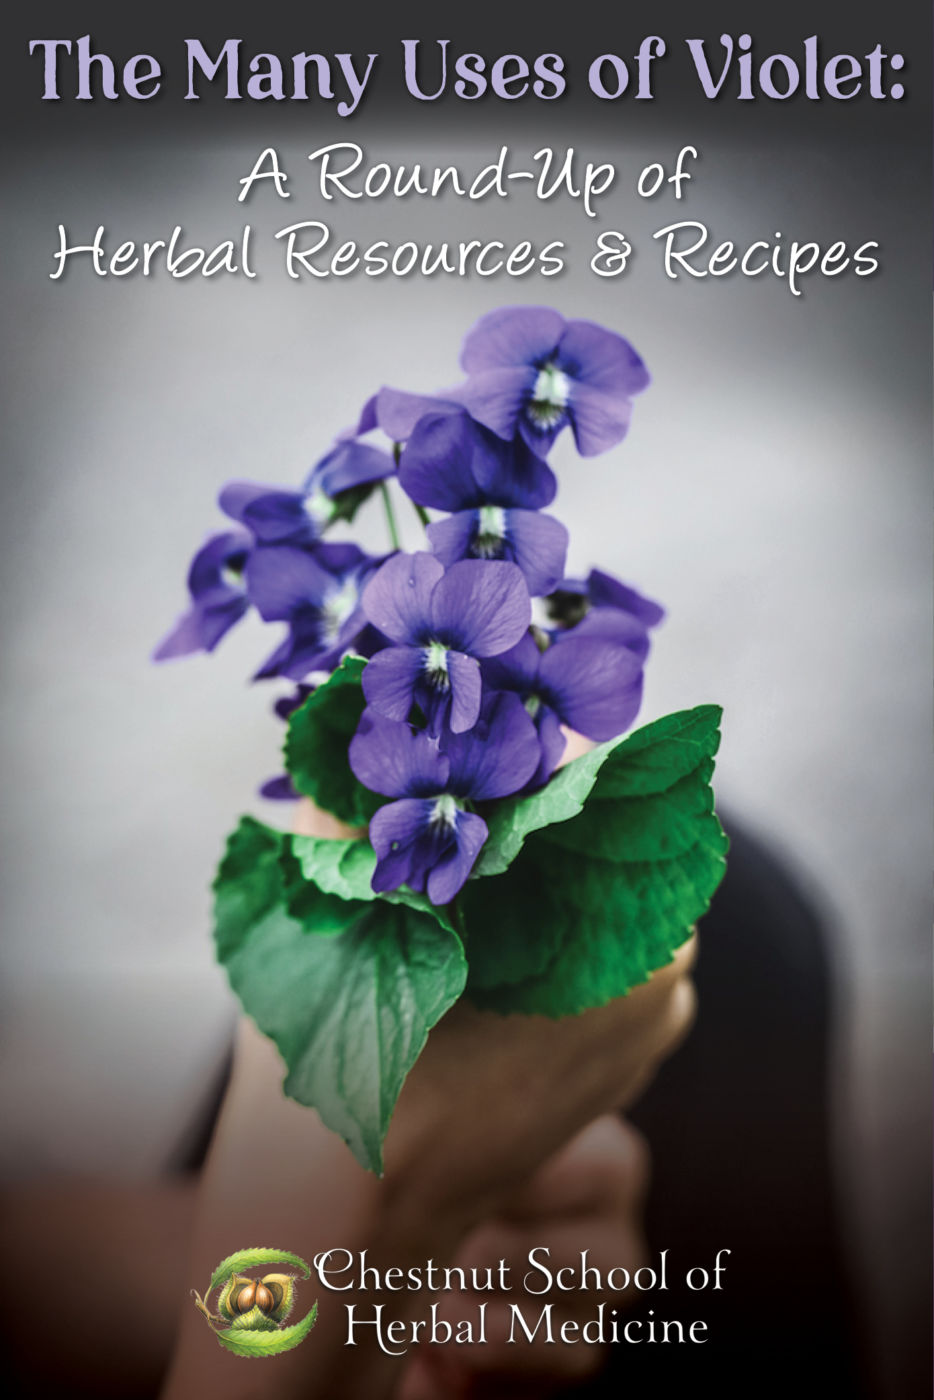 The many uses of violet: a round-up of herbal resources & recipes.